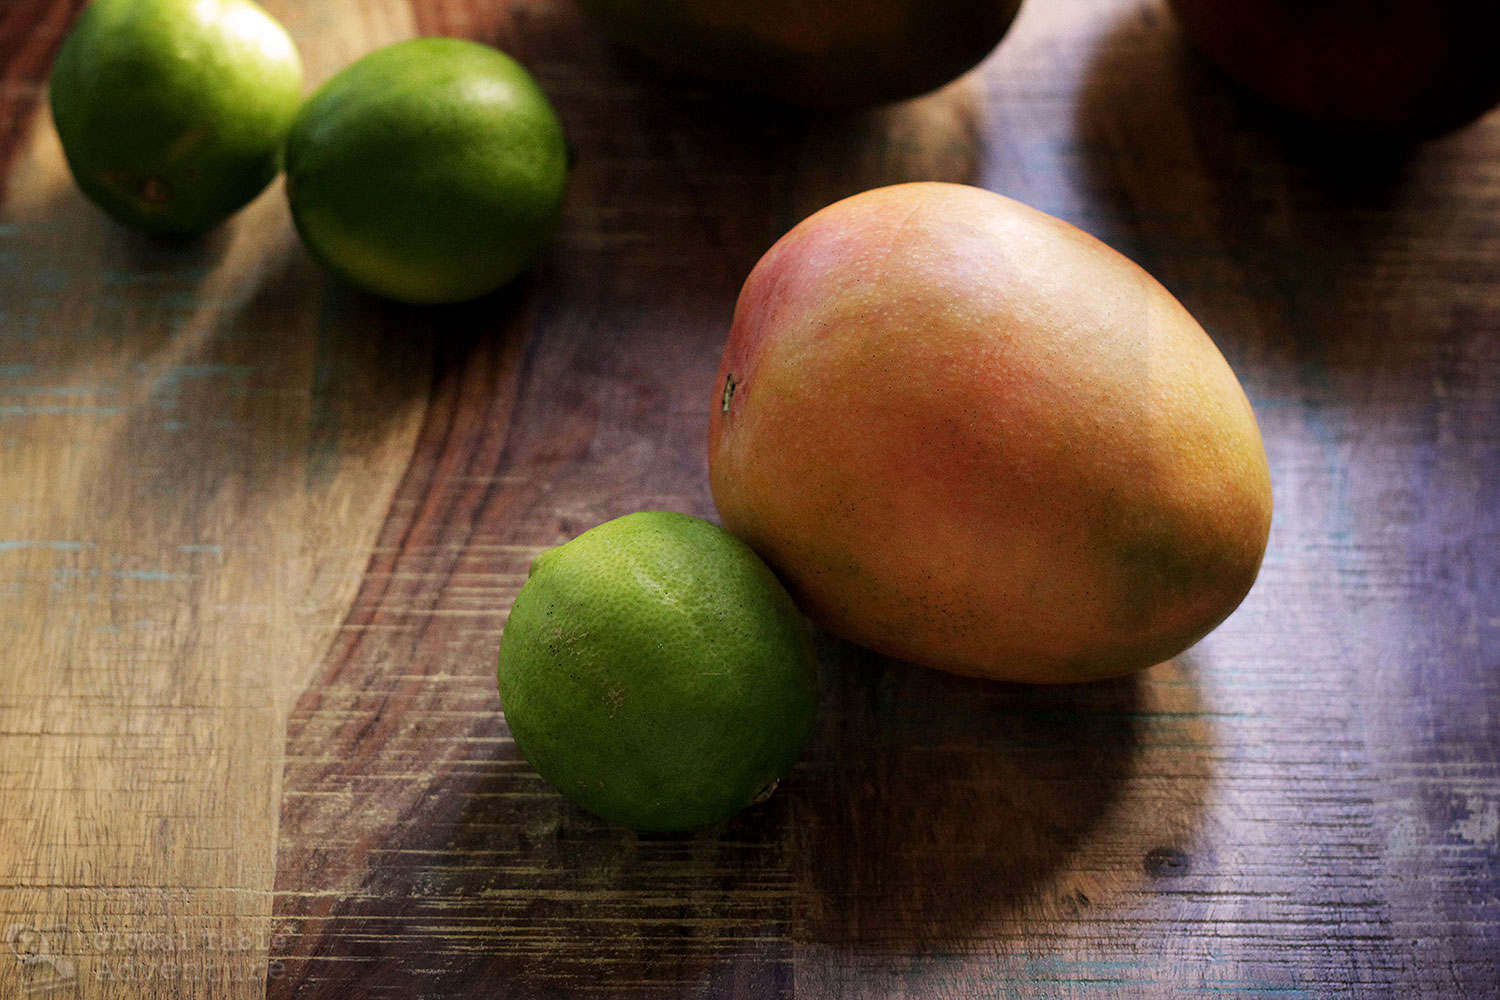 An easy recipe for Mexican mango with chili powder and lime juice